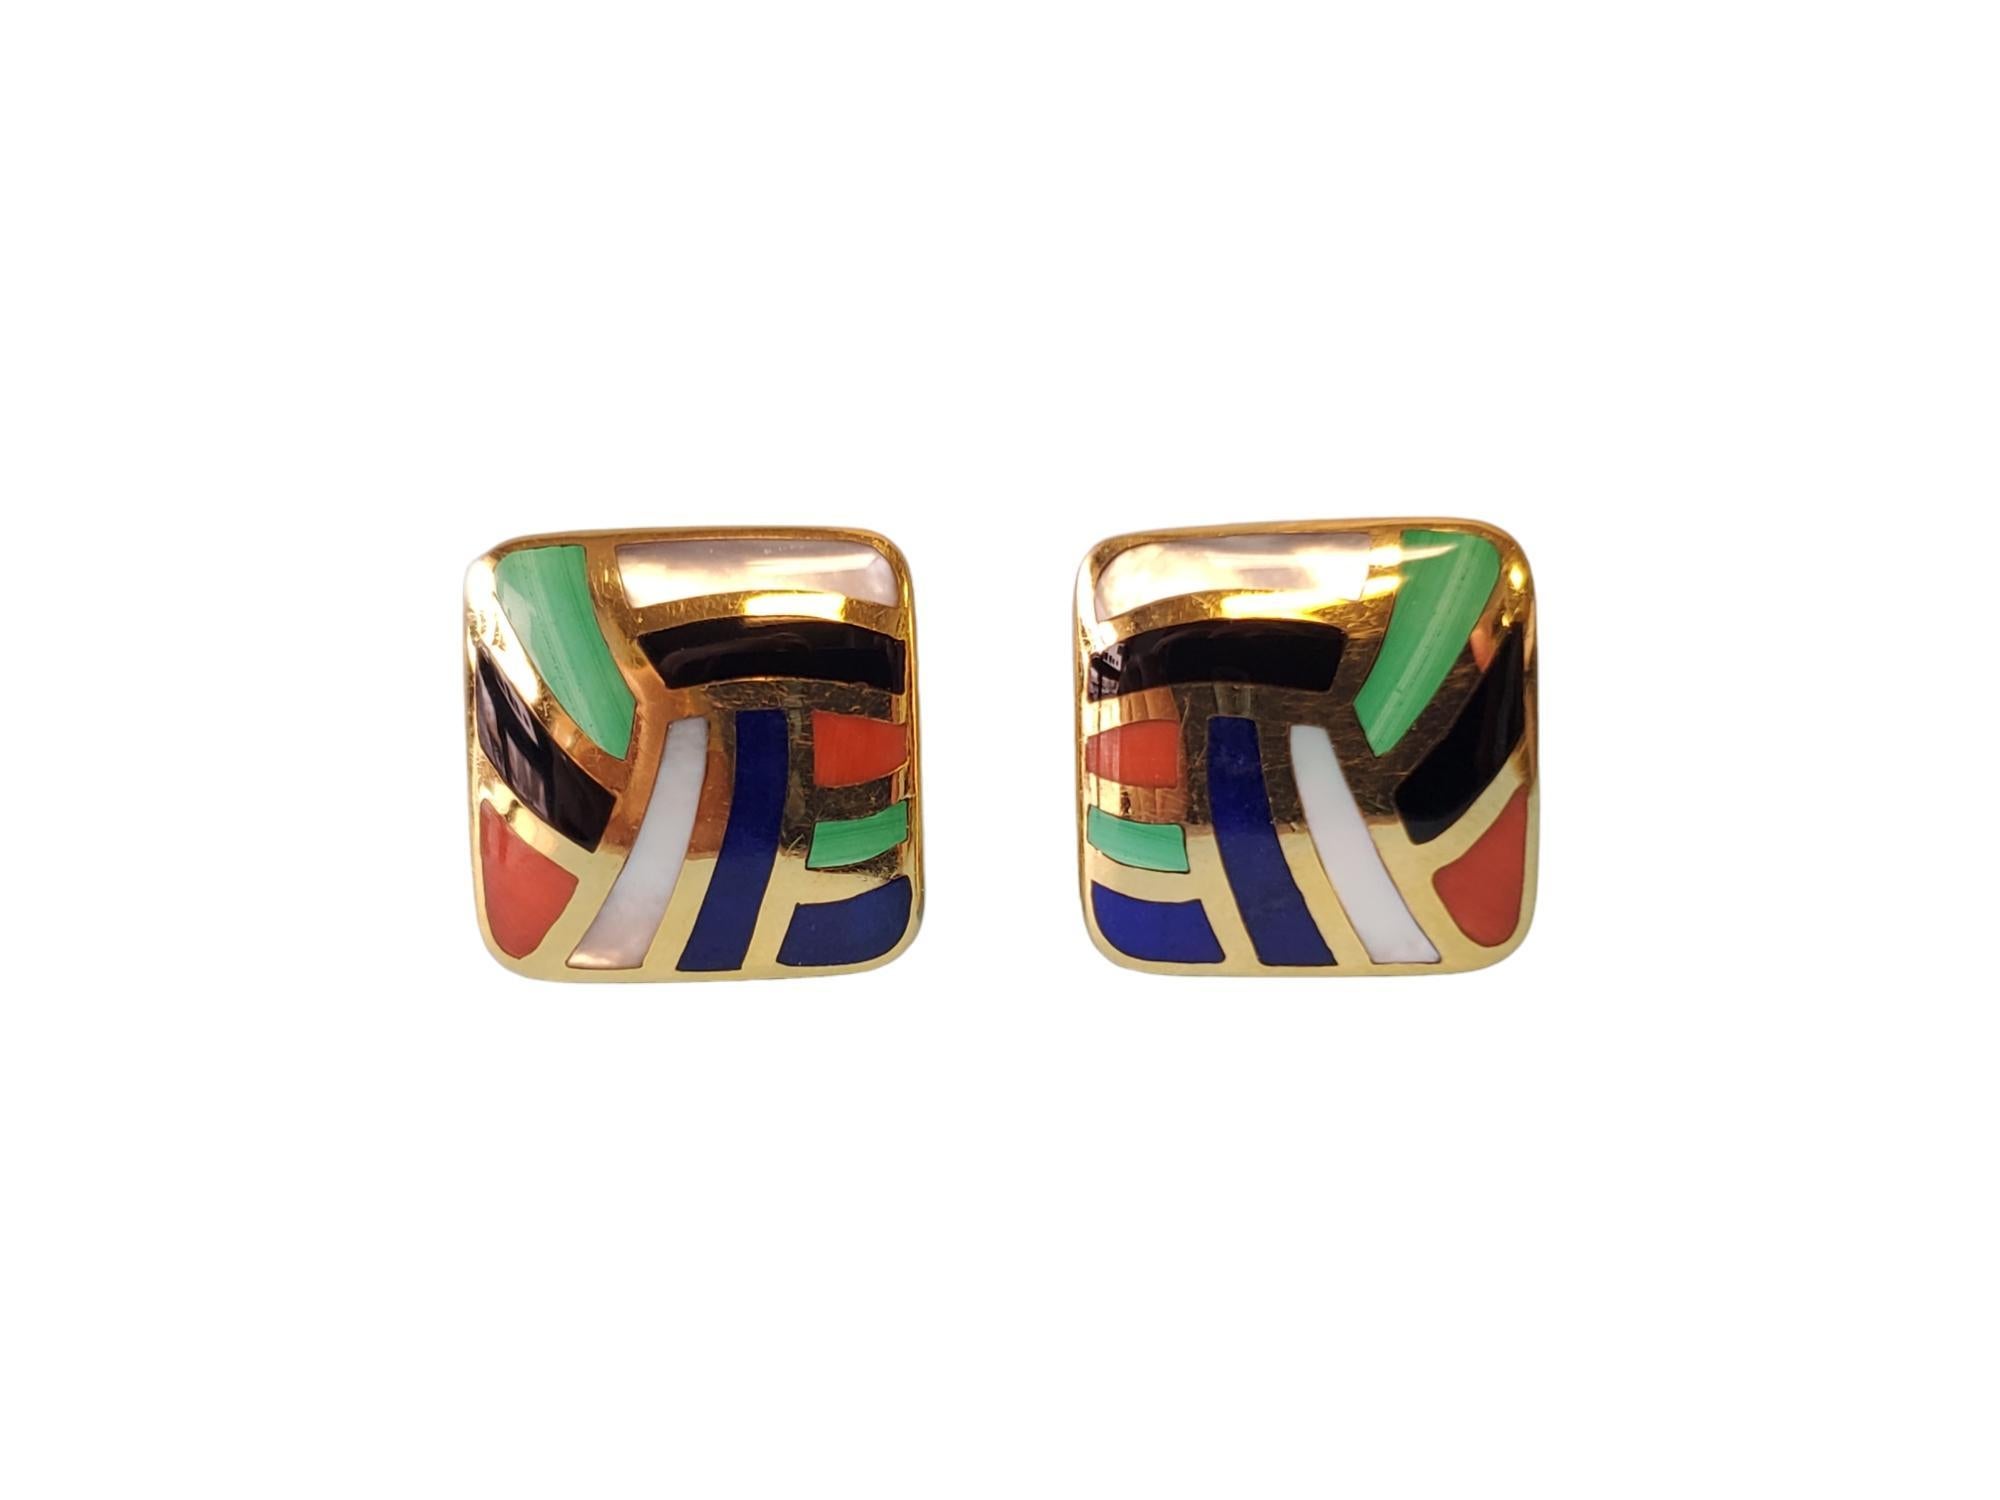 Asch Grossbardt 14k Inlay Earrings


Listed are these whimsical and geometric Asch Grossbardt 14k vintage cushion earrings. The stones featured are MOP, Lapis, Onyx, Malachite and Coral. The earrings are 18mmx18mm and in excellent condition. This